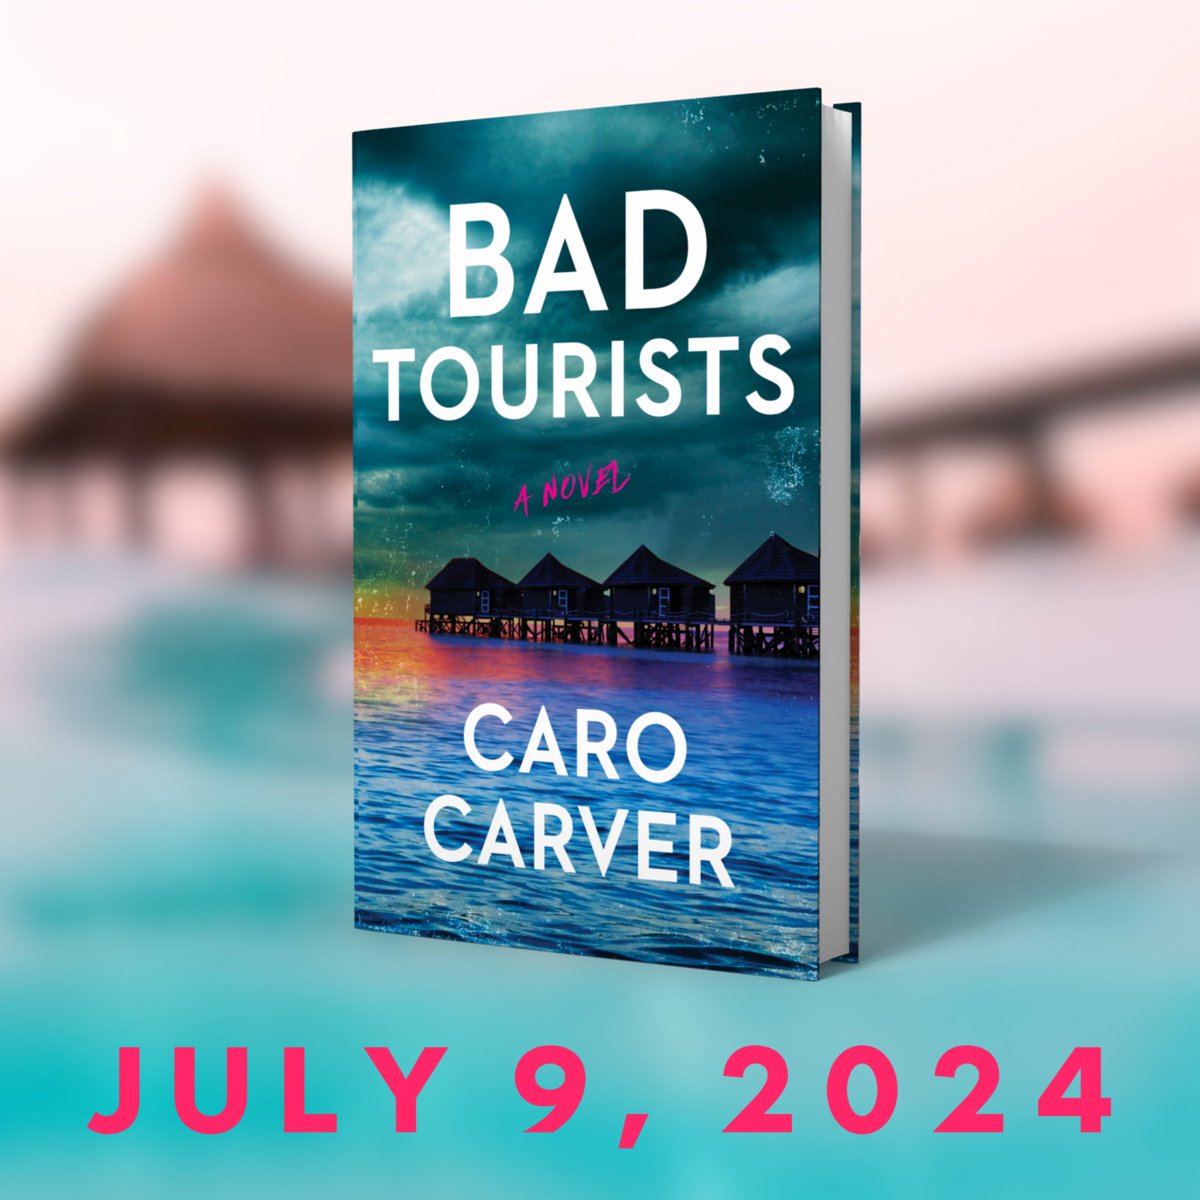 COVER REVEAL 🌟 Three tight-knit friends embark on an extravagant divorce trip to the Maldives where they can unwind and celebrate a new chapter in midlife—until they realize the resort of their dreams is harboring a killer... Learn more 👀 bit.ly/3RfxMlH